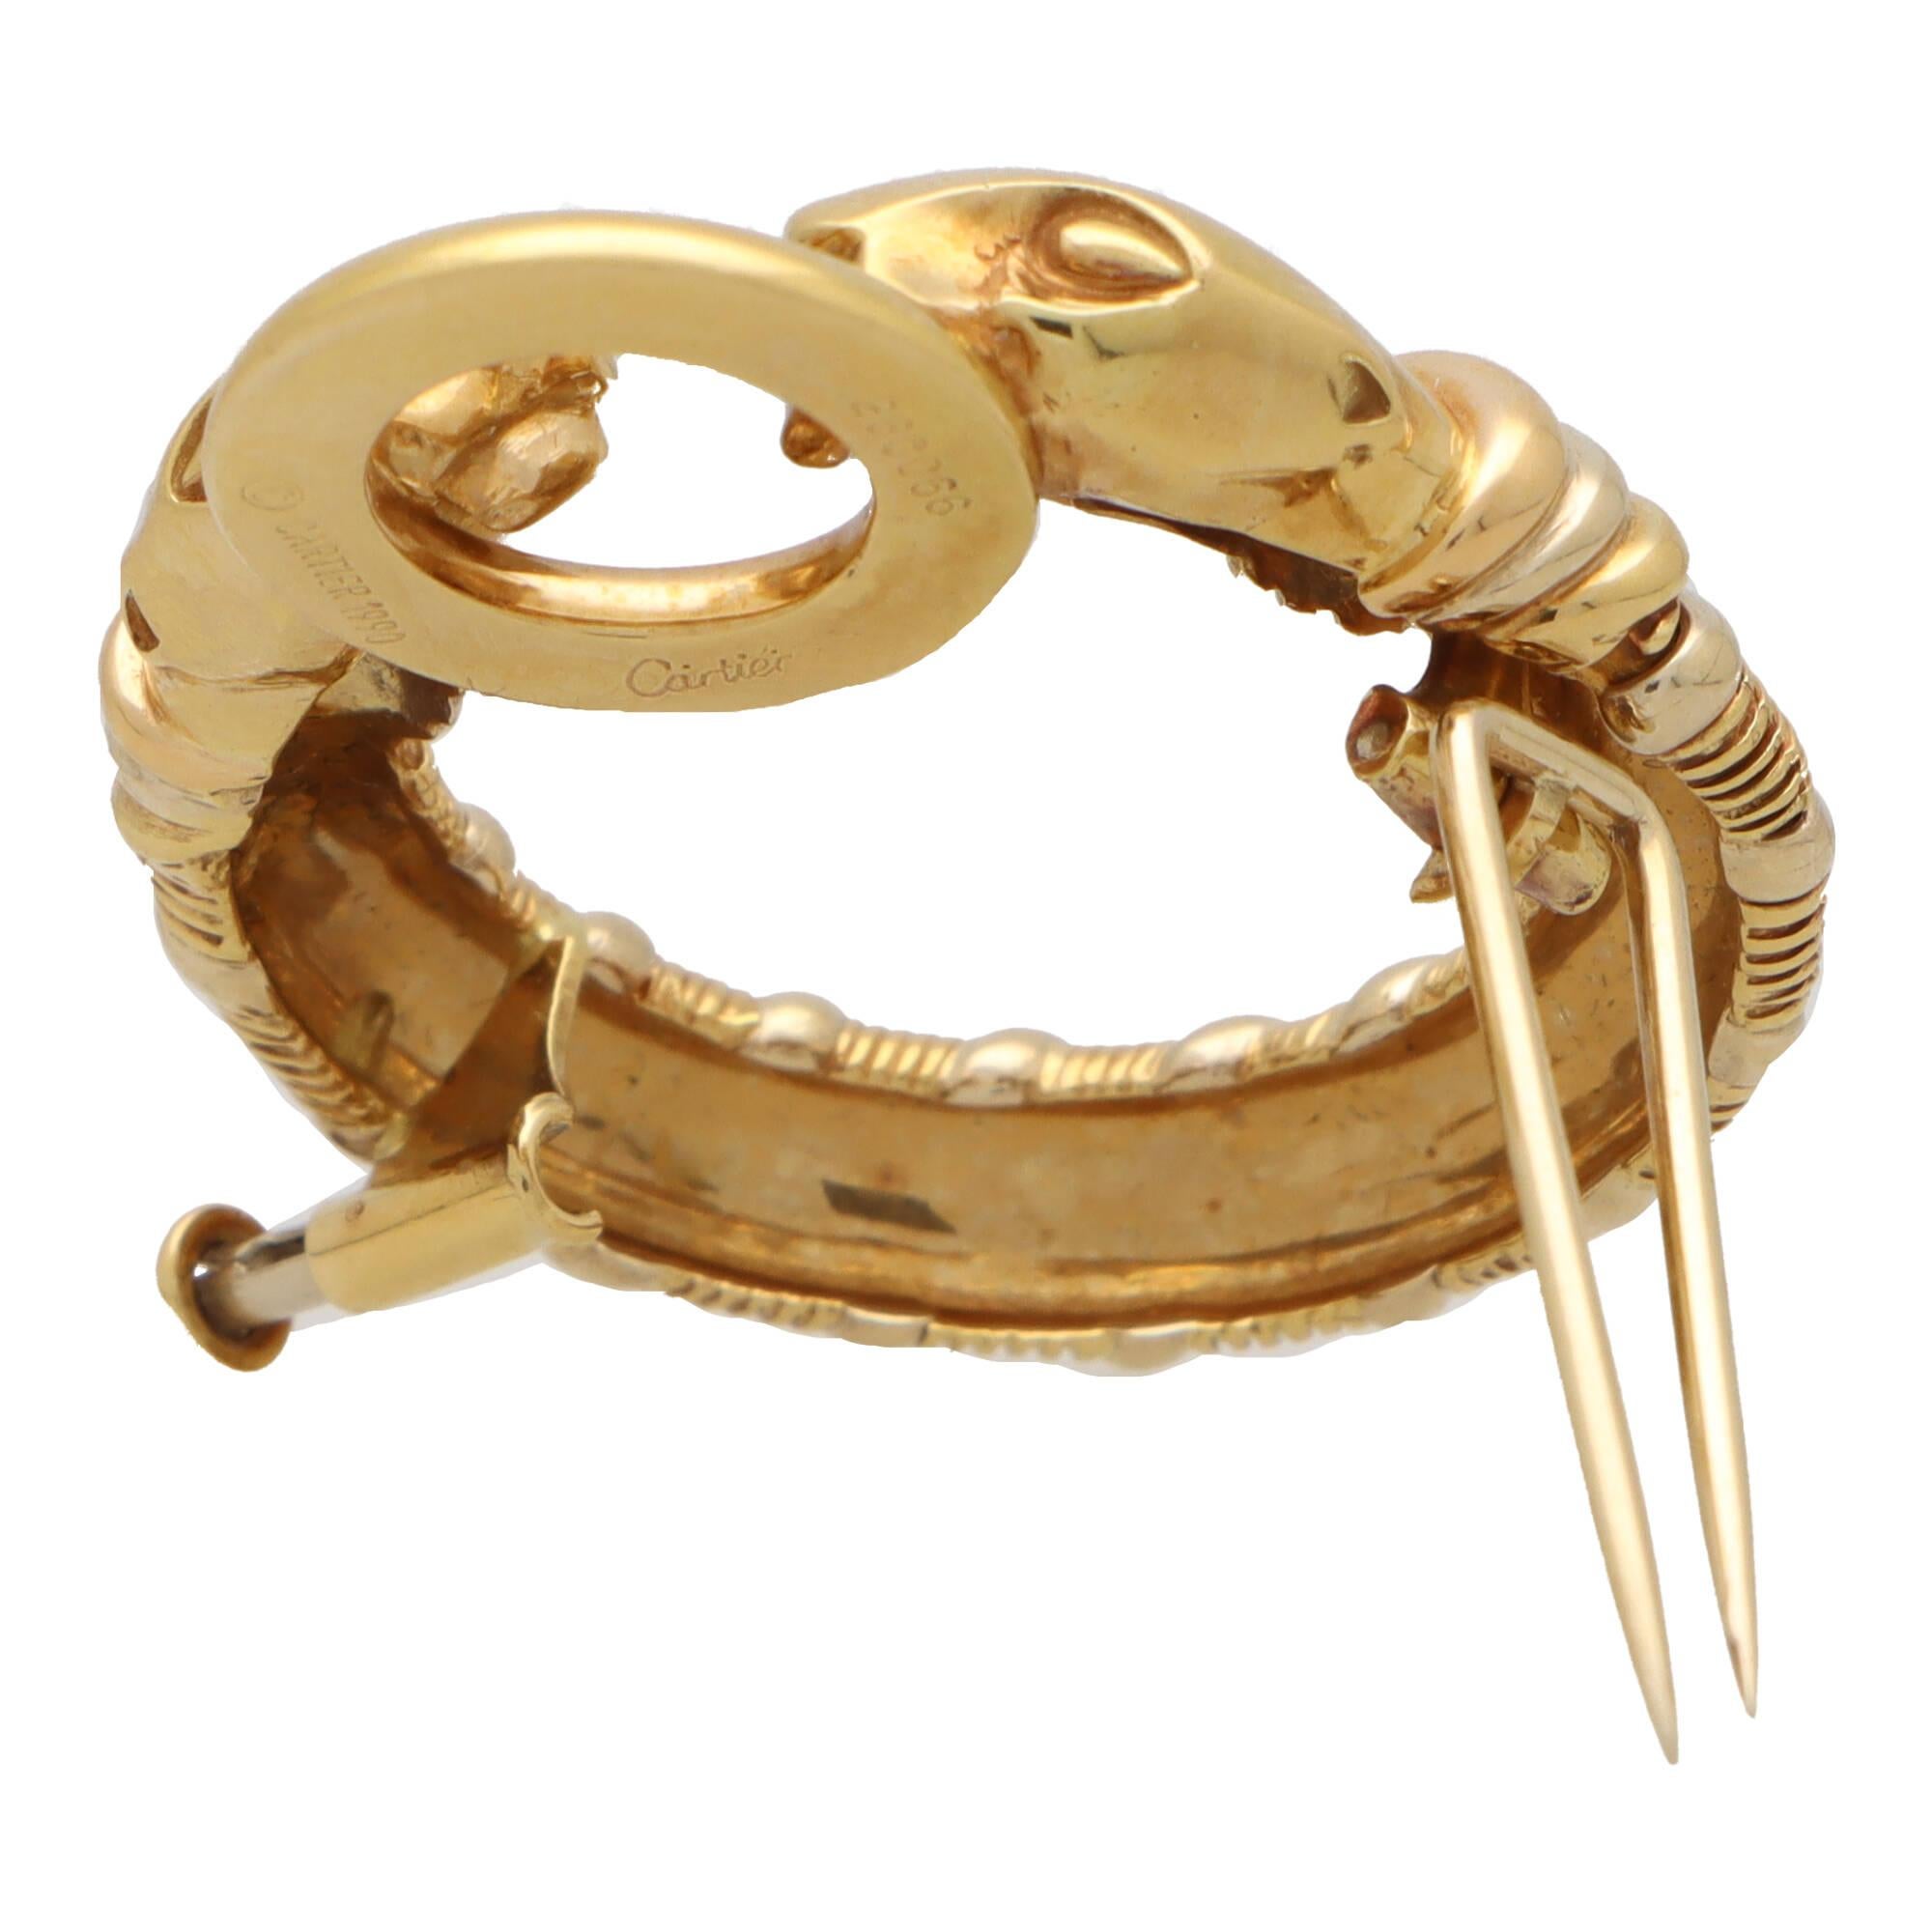 A beautiful vintage Cartier Panthère double headed brooch set in 18k yellow and white gold.

From a discontinued Cartier collection, the brooch depicts a double headed panther; both of which are grasping a polish yellow gold ring. The body of the